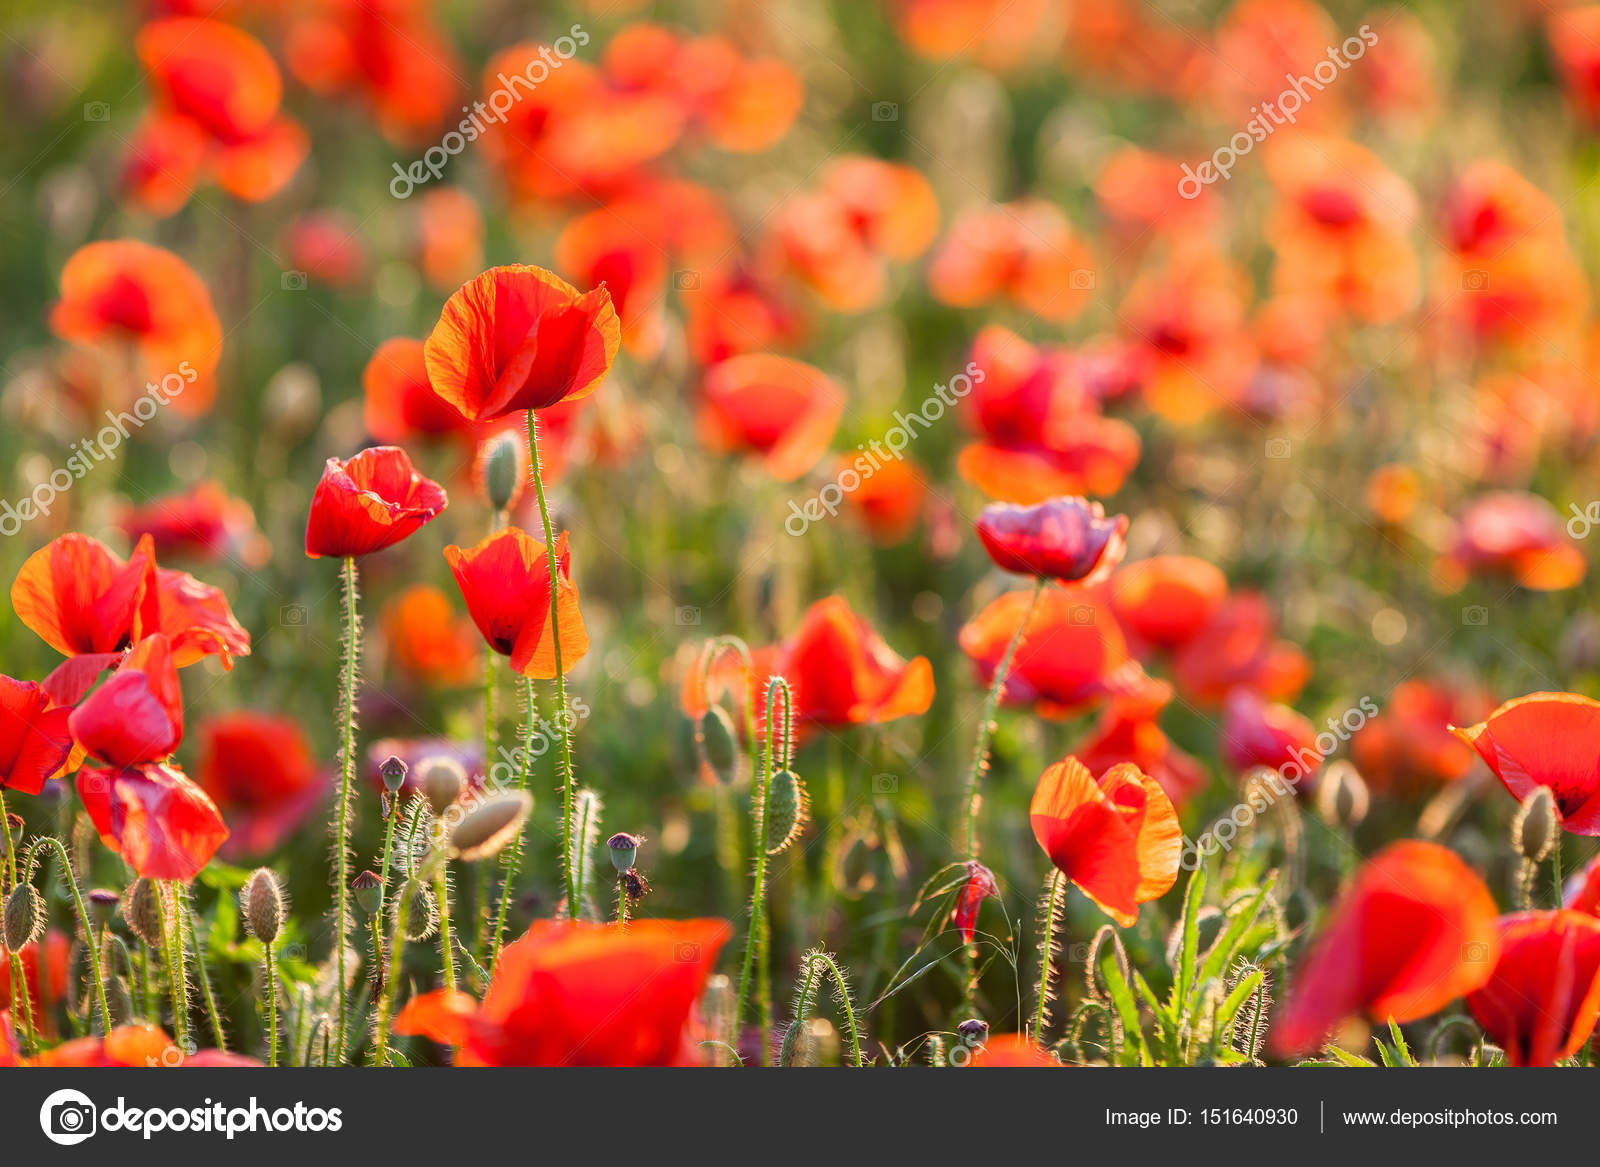 Poppy farming, nature, agriculture concept - industrial farming of poppy flowers - close-up on flowers and stems of the red poppy field - empty space for text. Stock Photo by 151640930